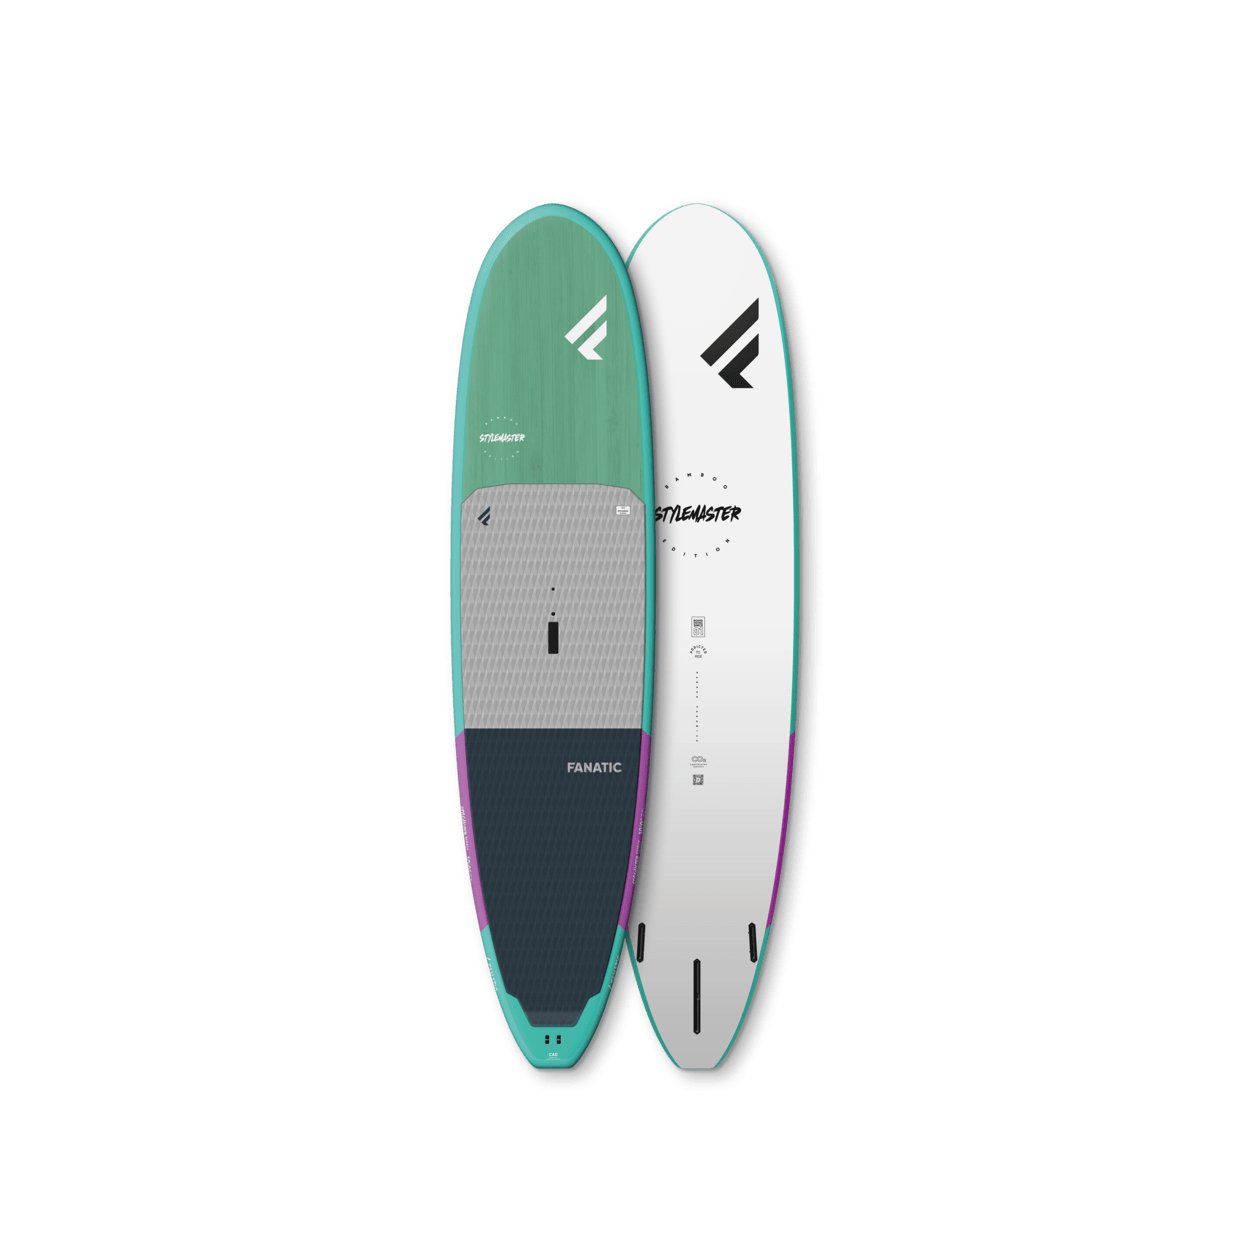 Fanatic Stylemaster Bamboo 2023 - Worthing Watersports - 9010583133560 - SUP Composite - Fanatic SUP